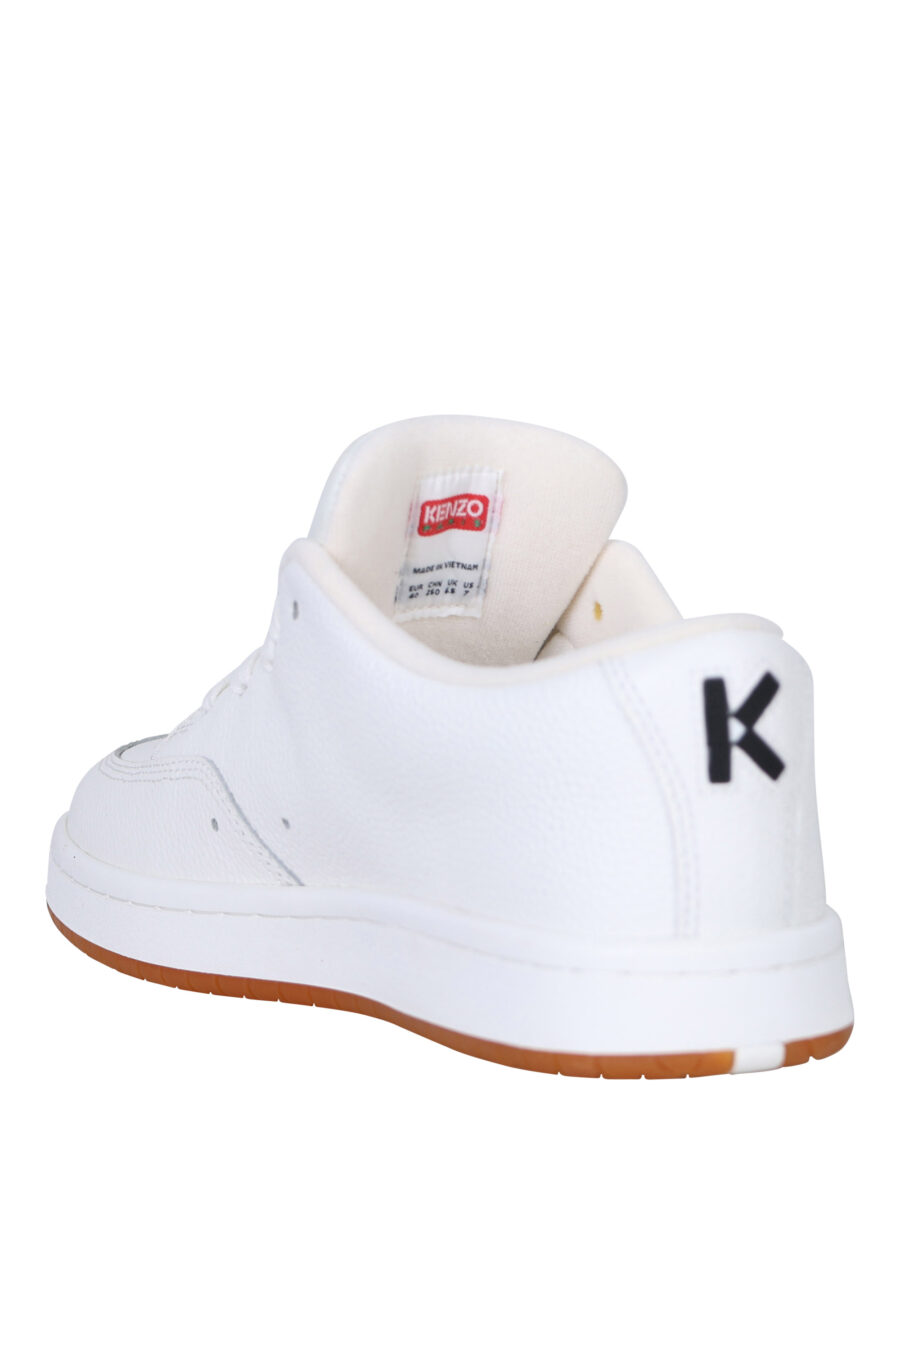 White trainers "kenzo dome" with minilogo and brown sole - 3612230556089 3